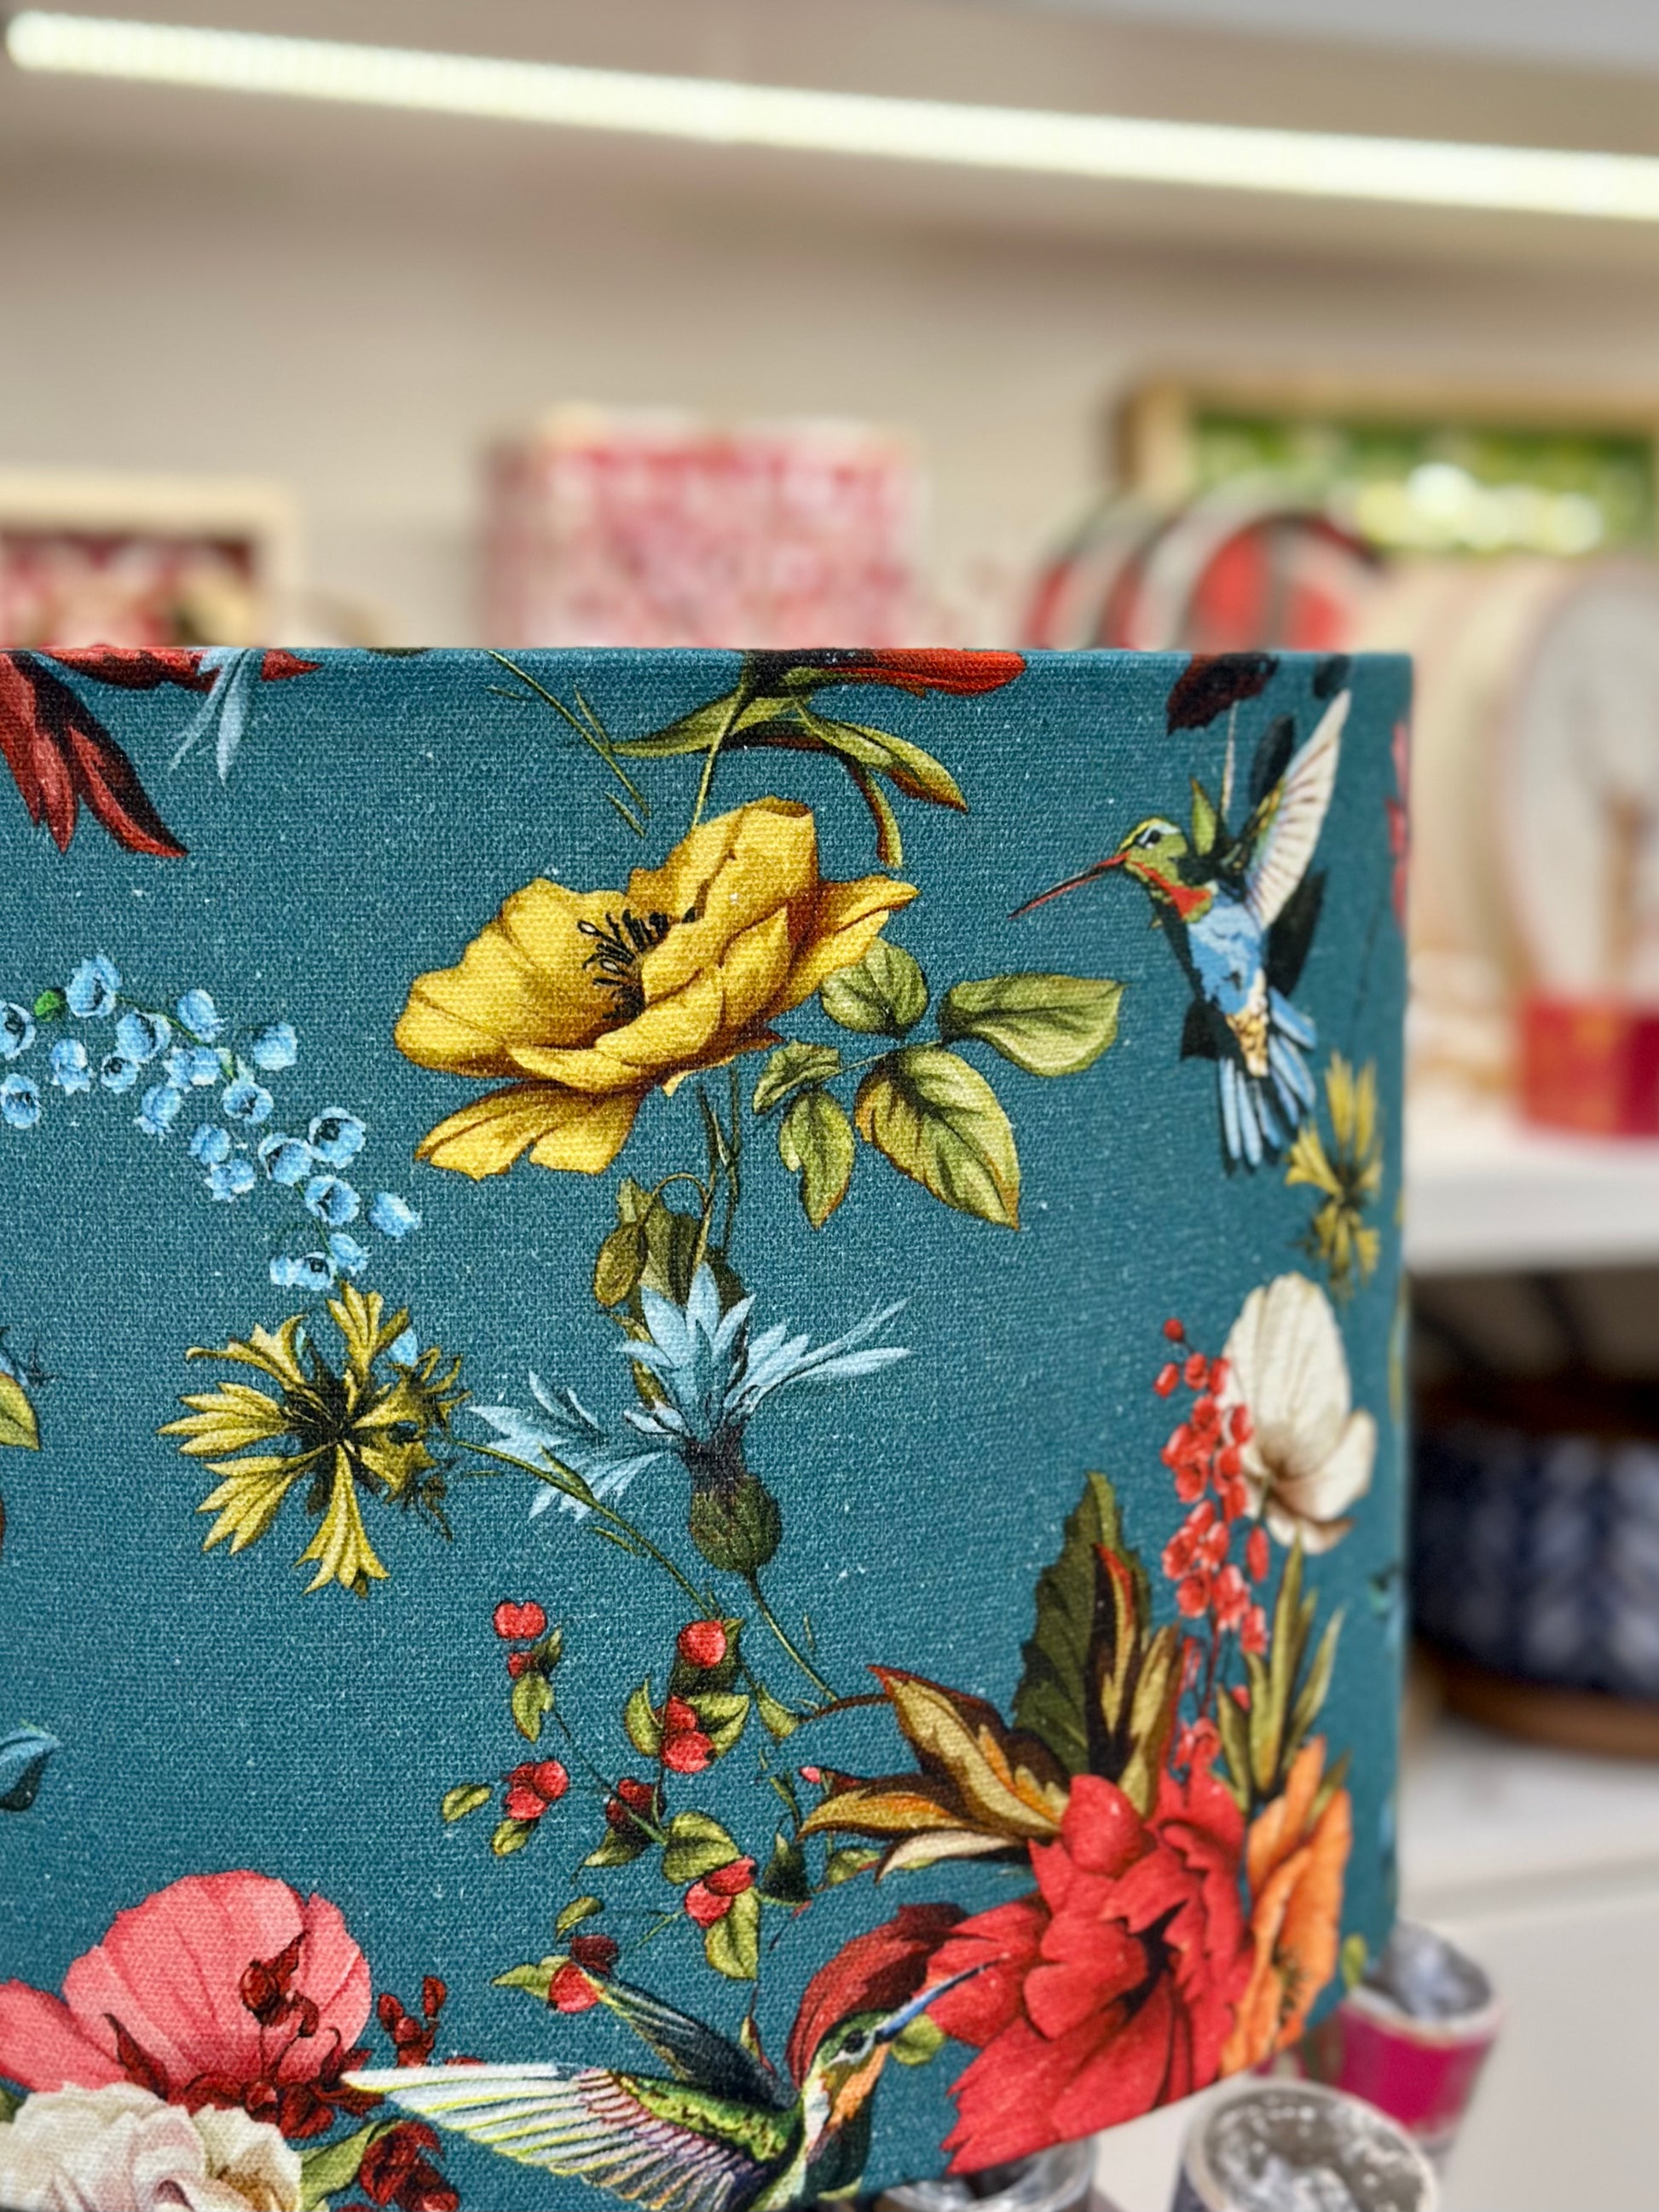 Handmade fabric lampshade Singapore with floral and bird design